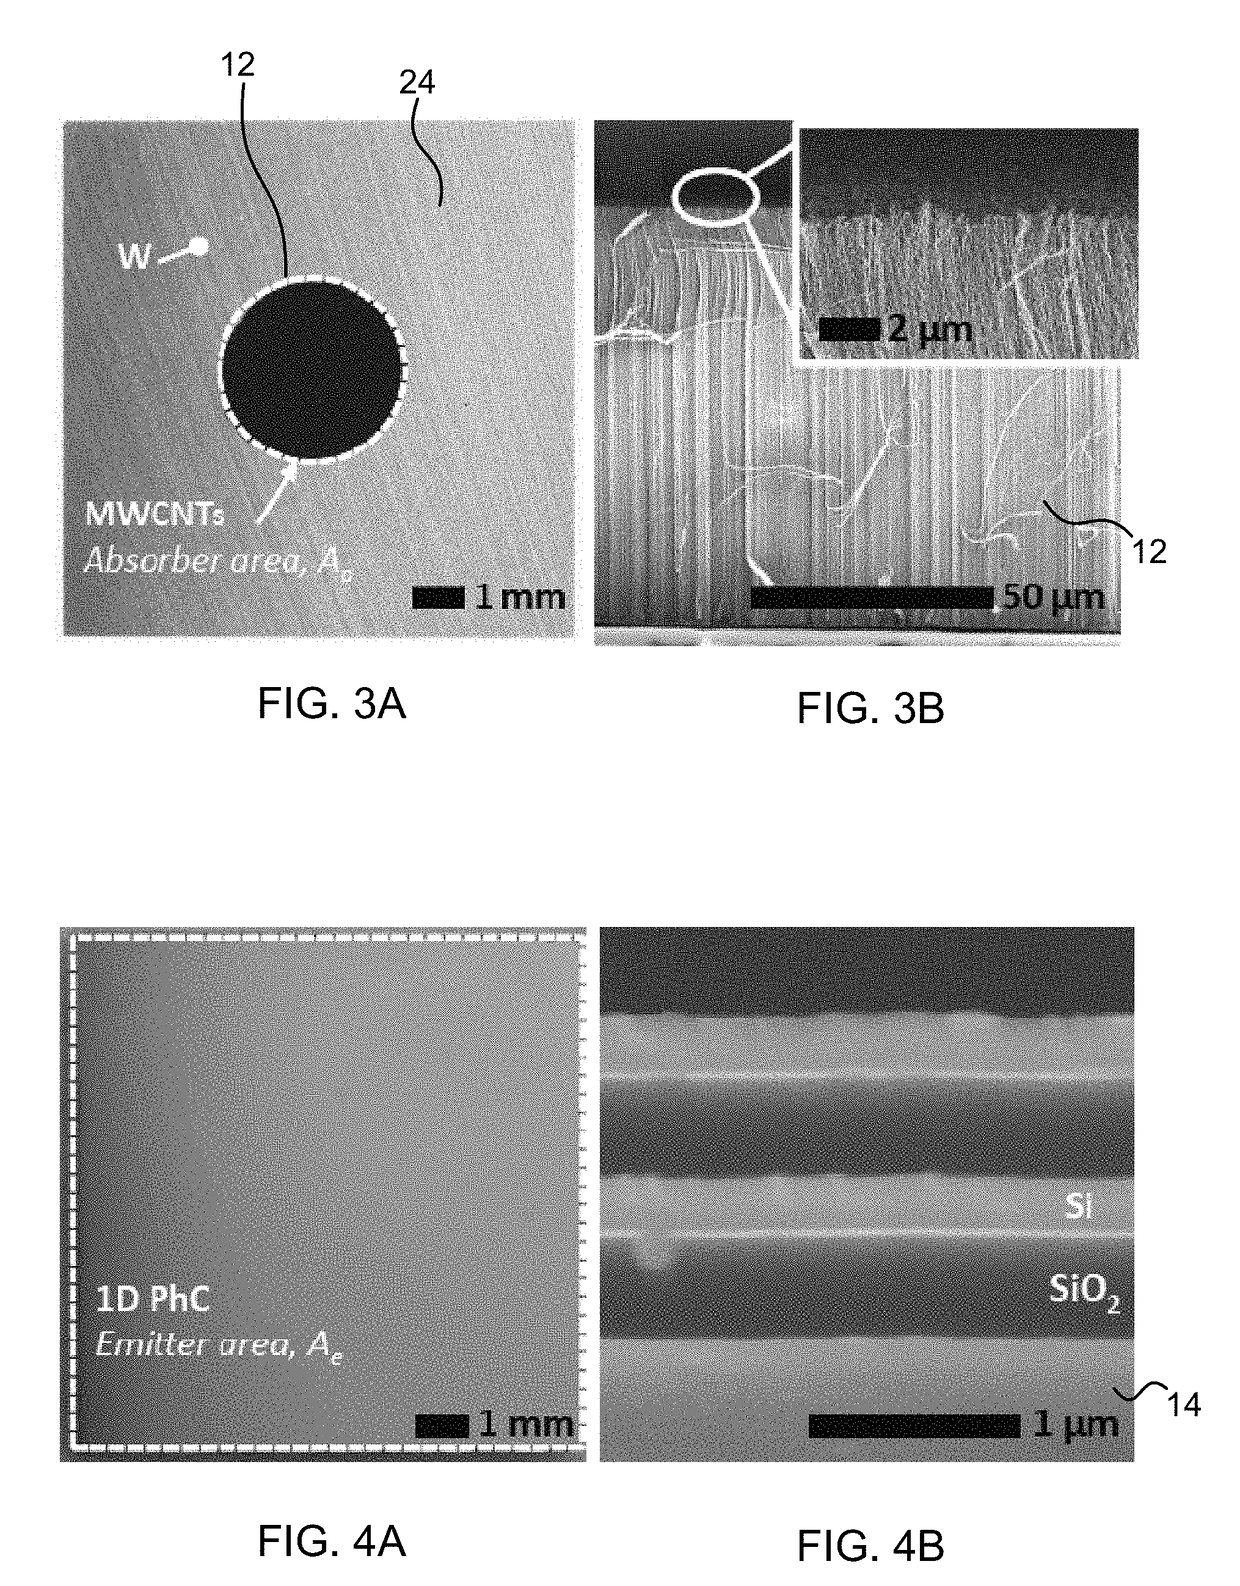 Spectrally-engineered solar thermal photovoltaic devices